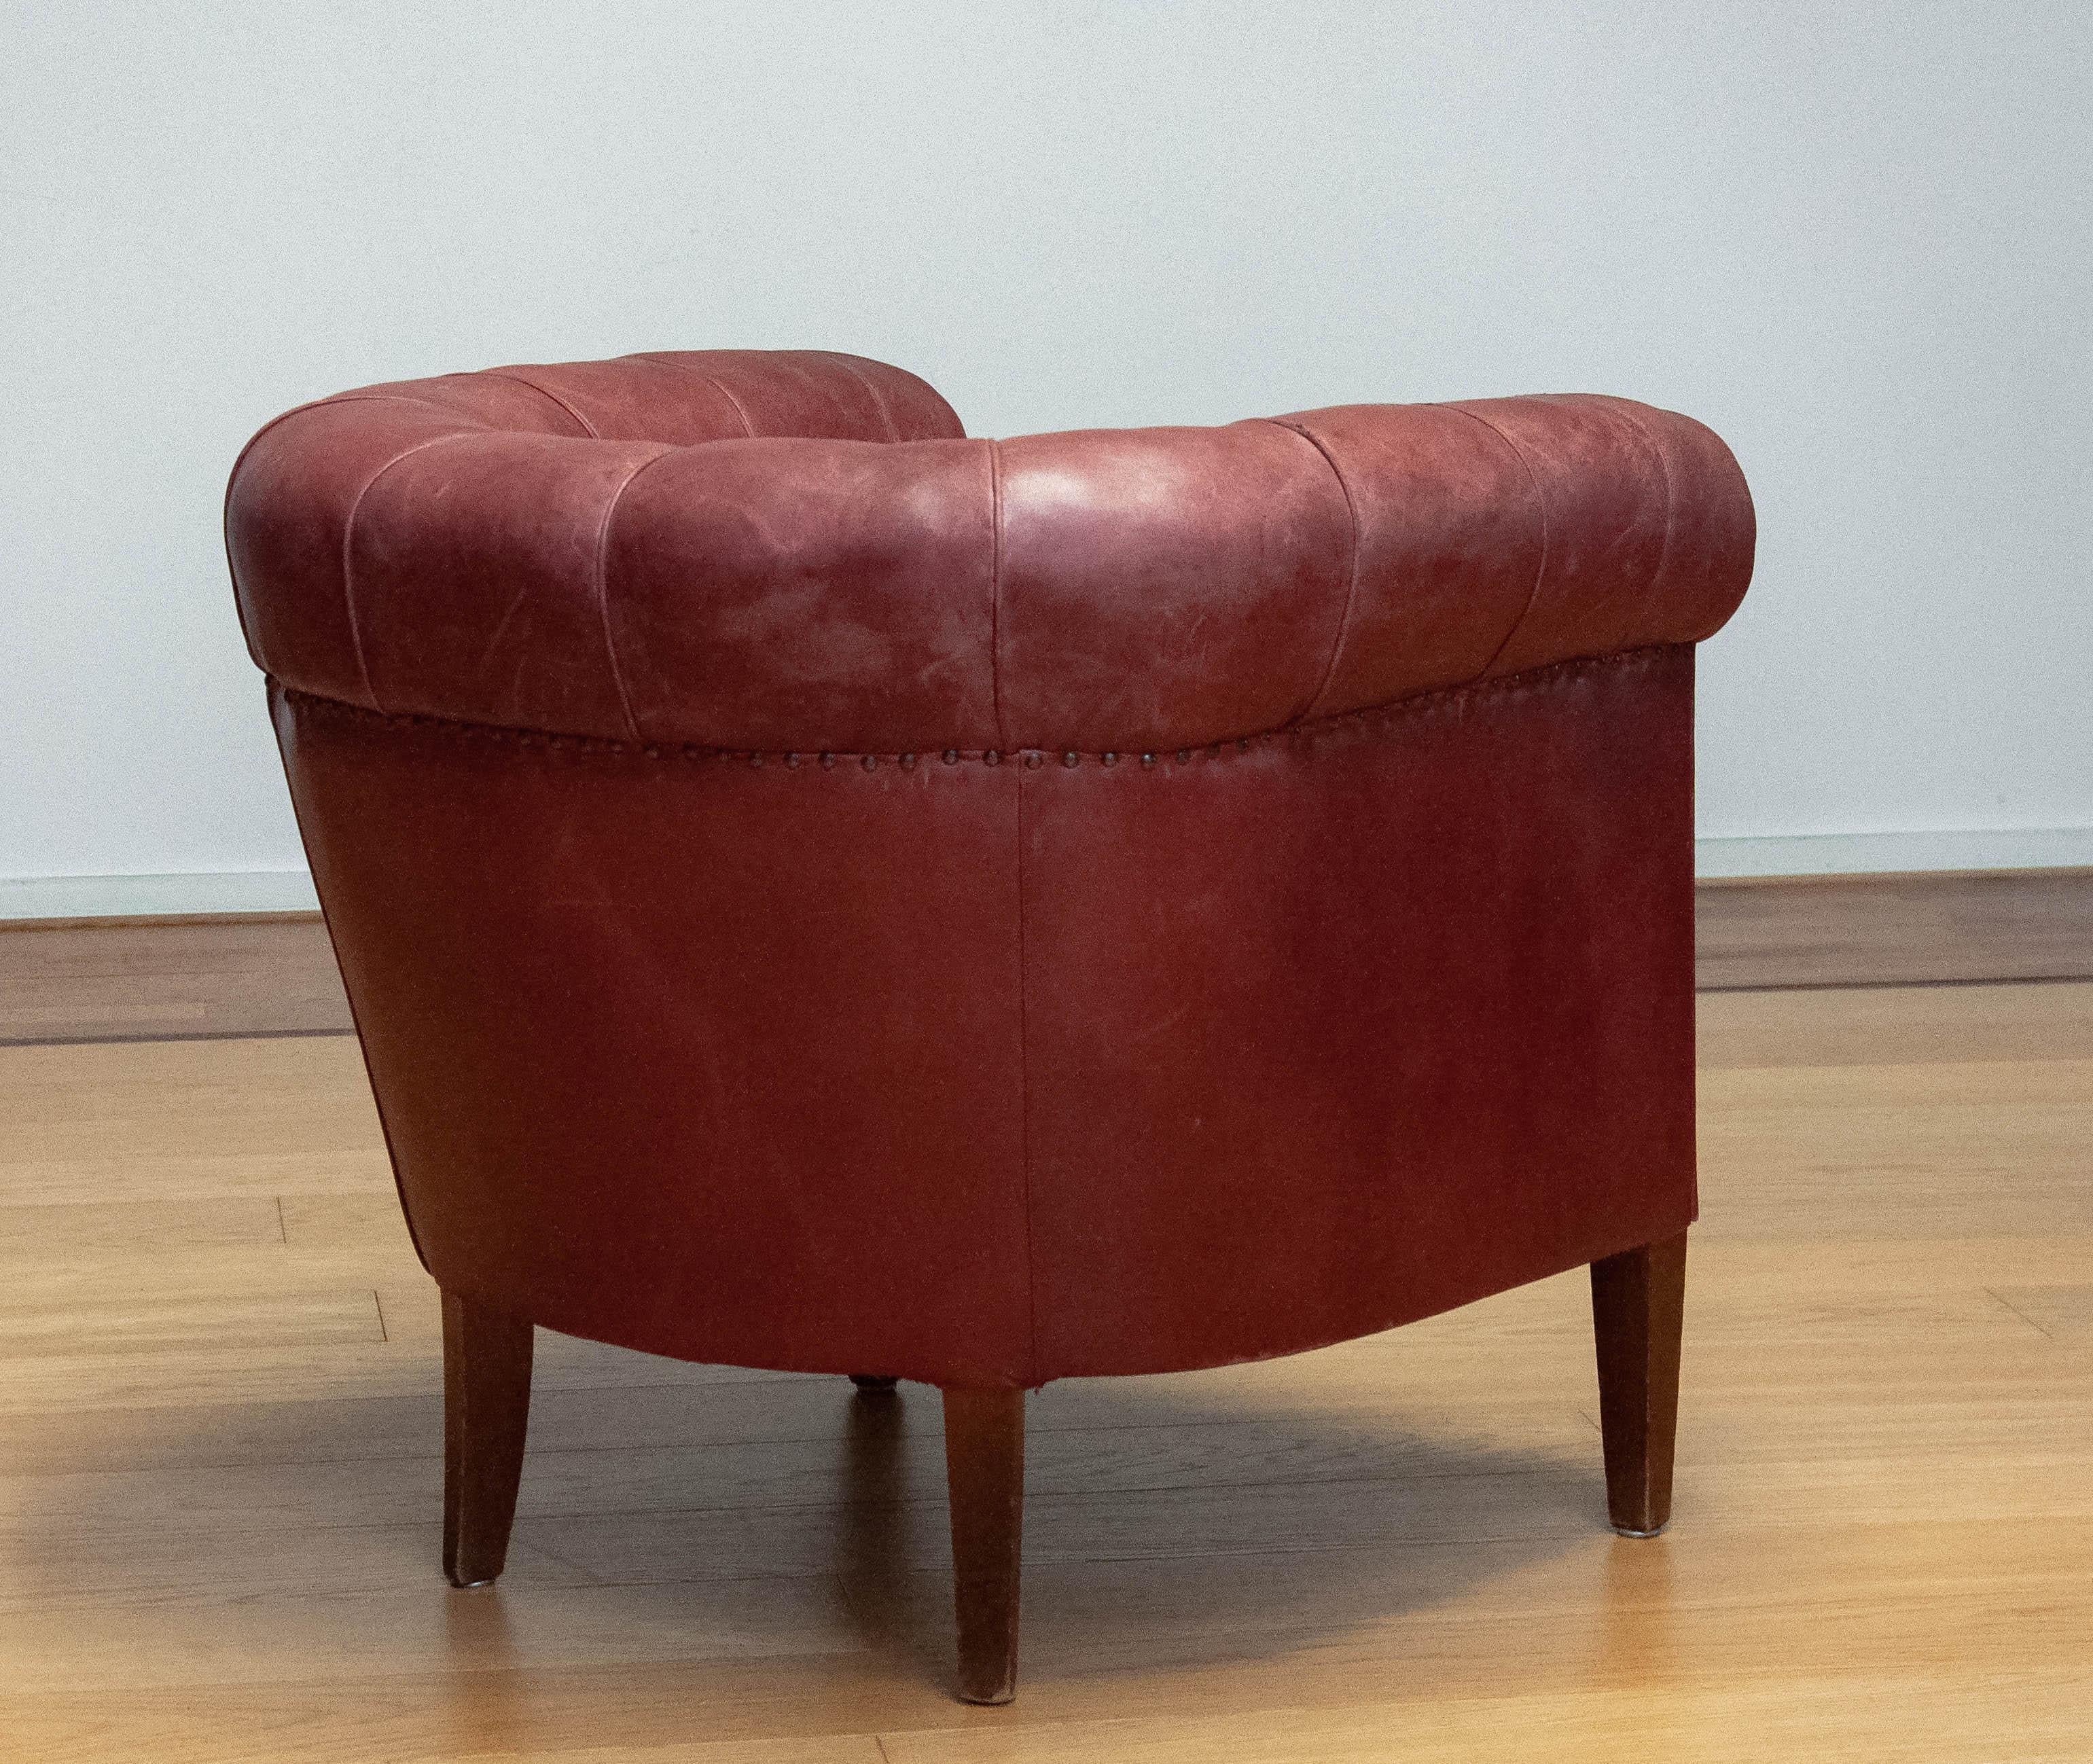 1930s Swedish Crimson Red Chesterfield Club Chair in Patinated Leather For Sale 2